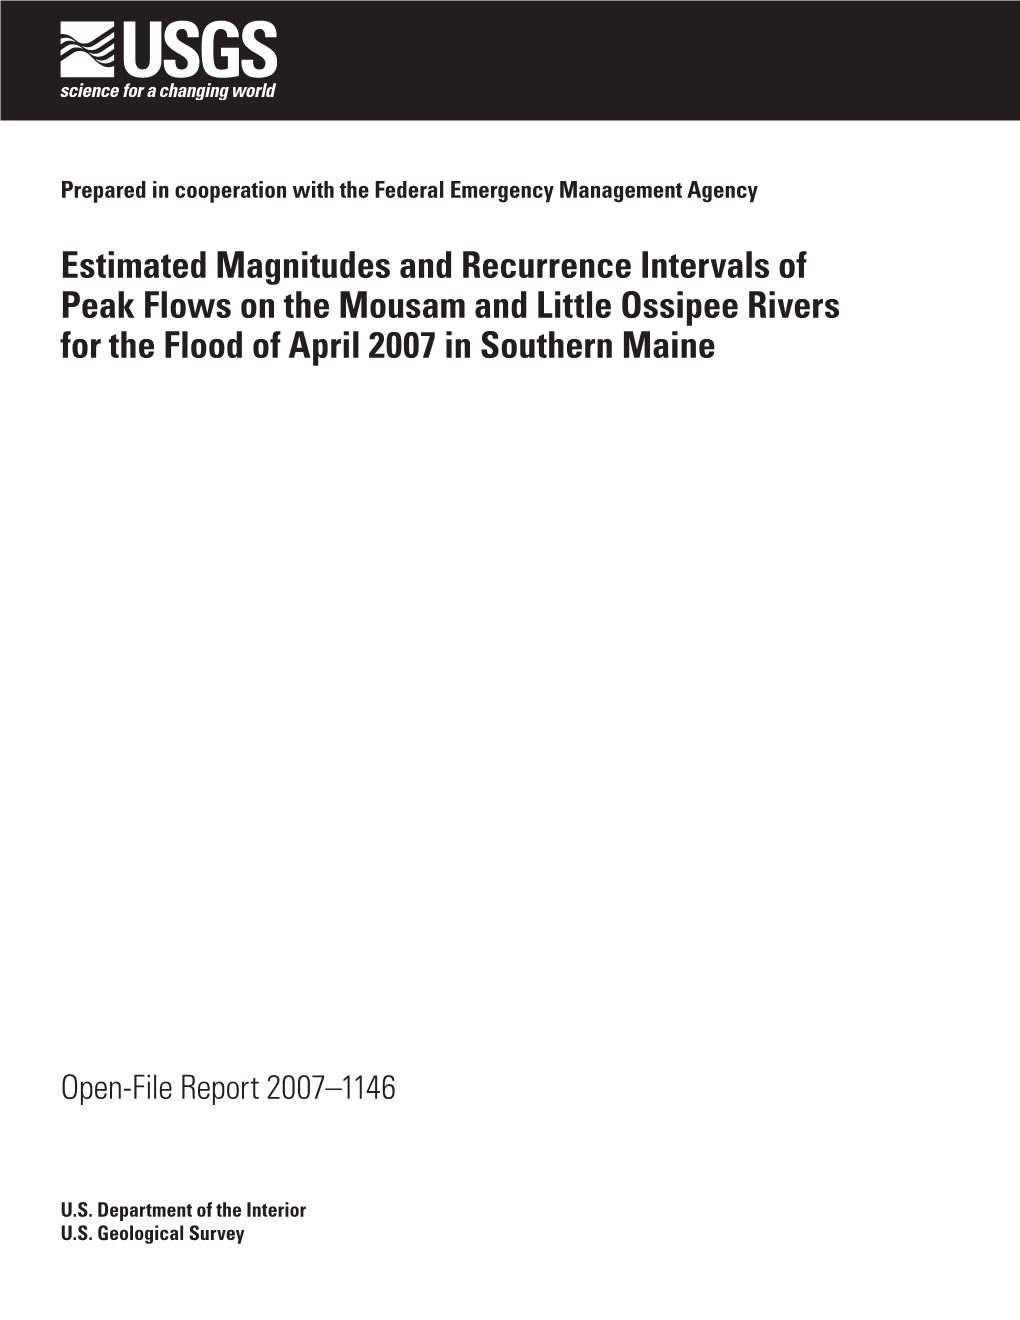 Estimated Magnitudes and Recurrence Intervals of Peak Flows on the Mousam and Little Ossipee Rivers for the Flood of April 2007 in Southern Maine